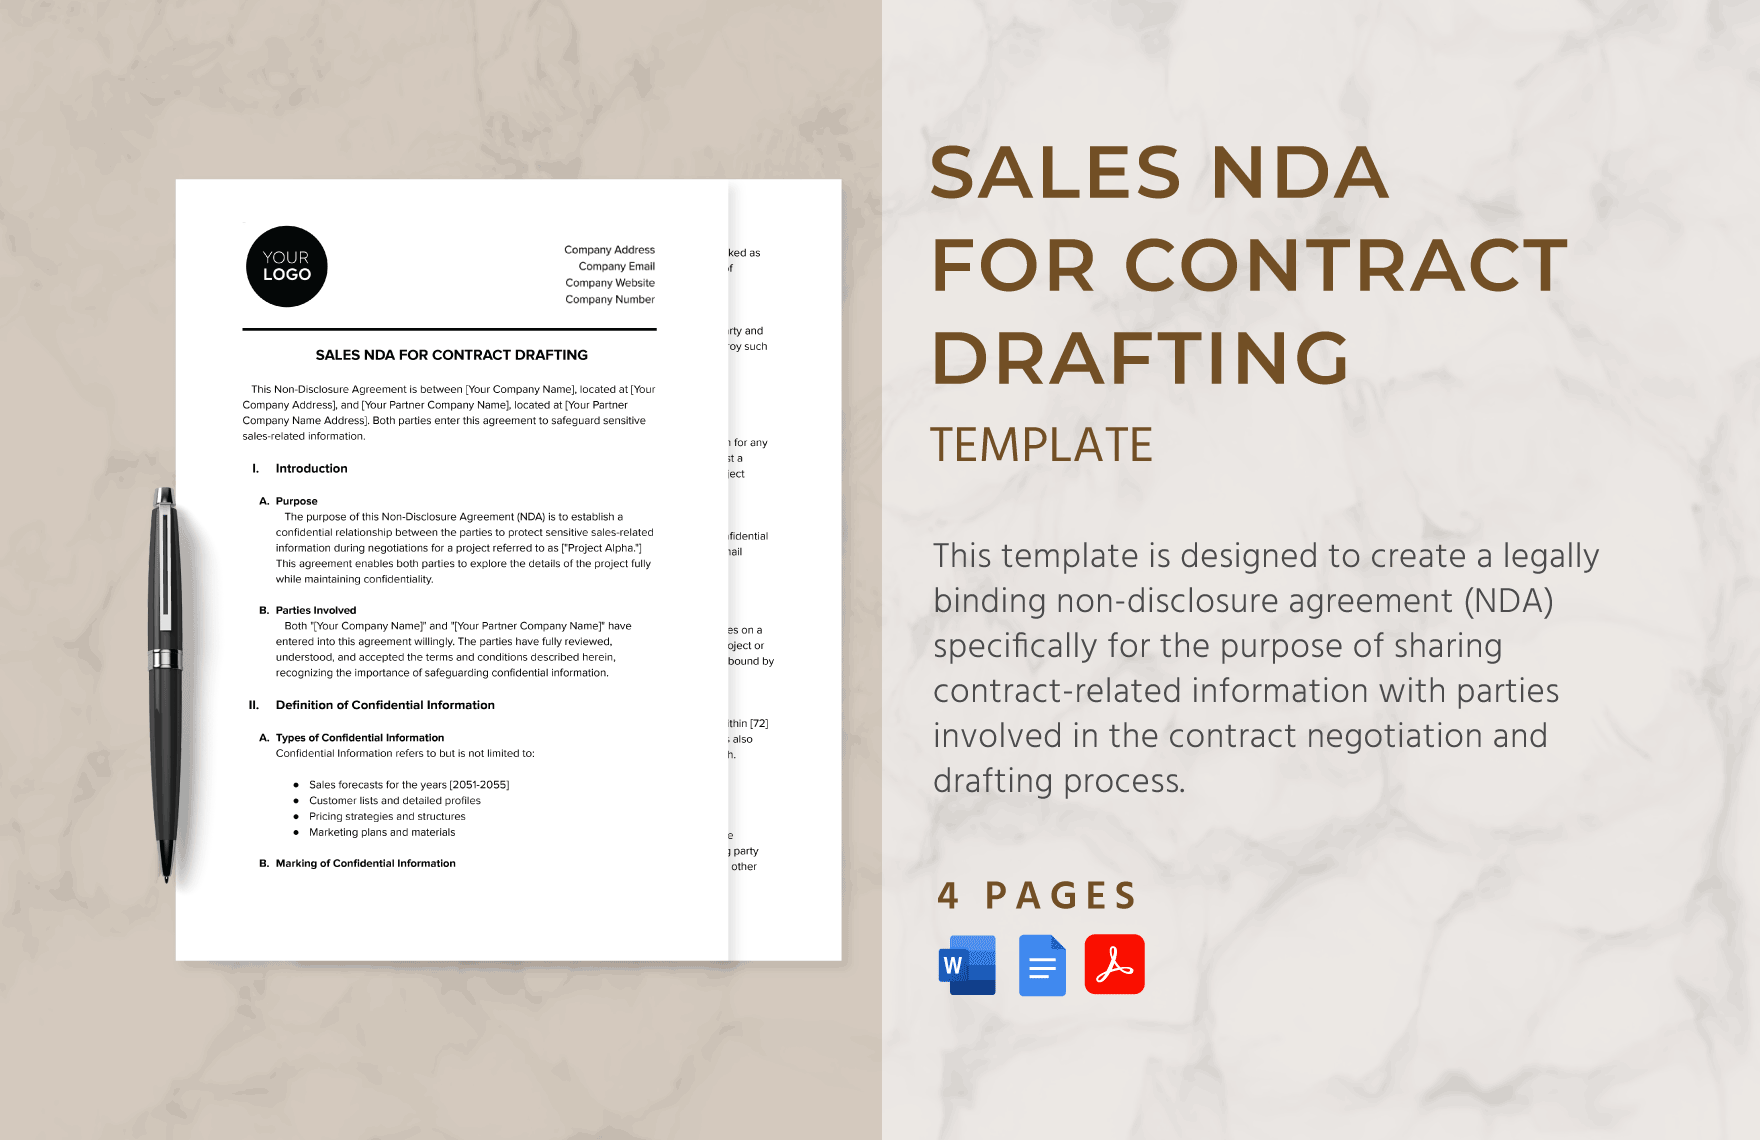 Sales NDA for Contract Drafting Template in Word, Google Docs, PDF